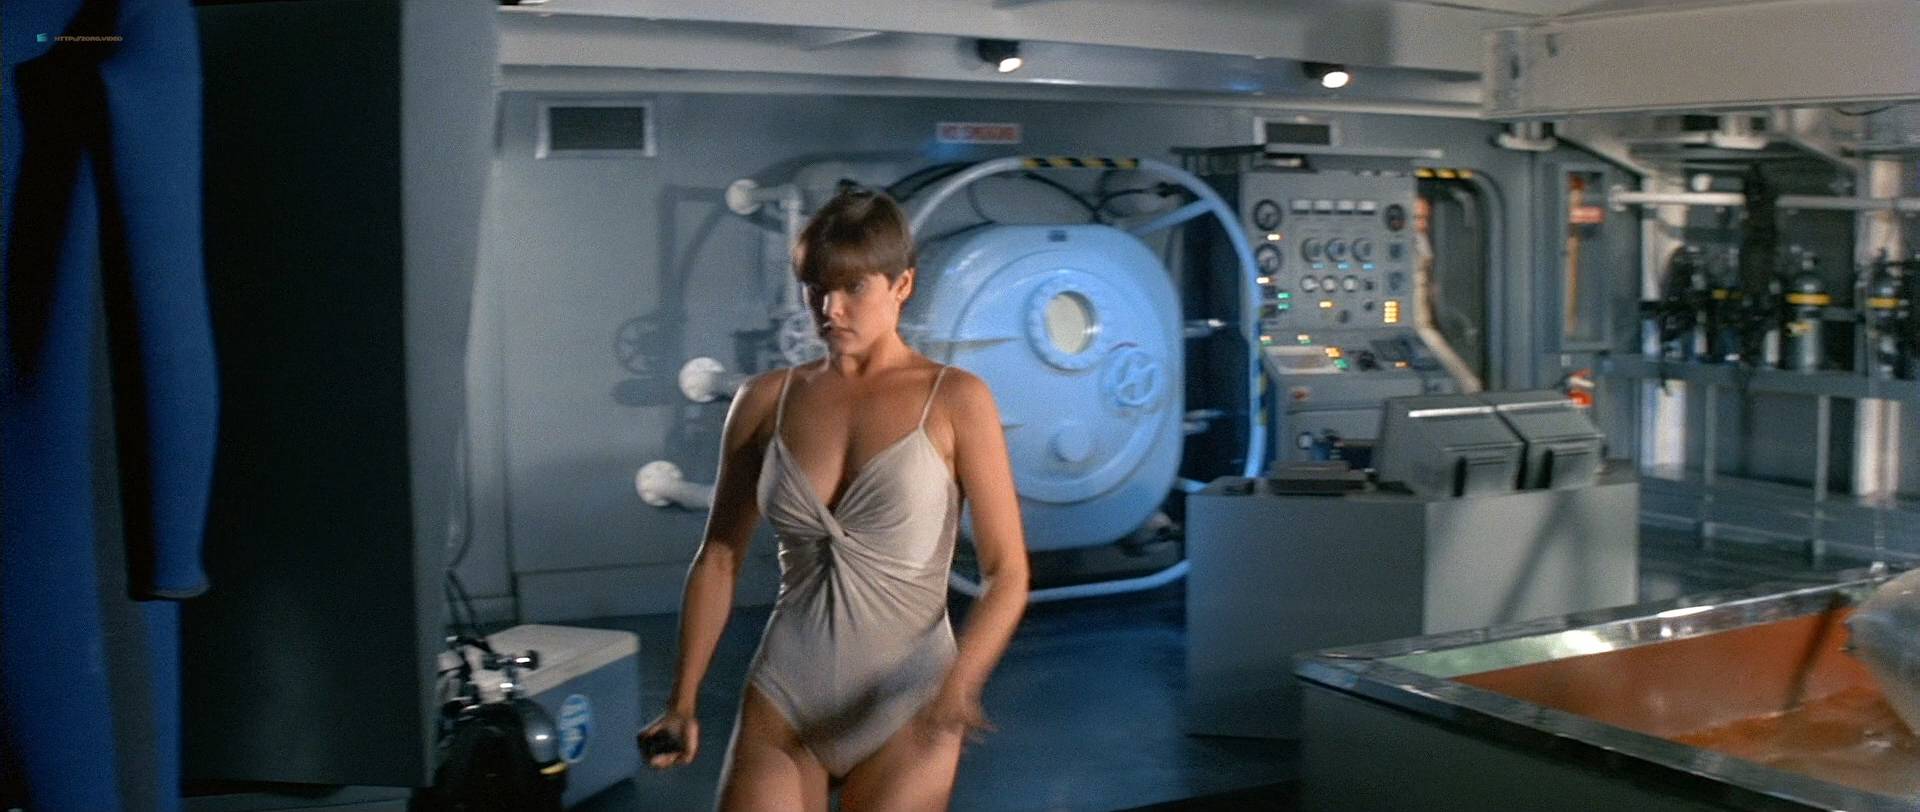 Carey Lowell hot leggy Talisa Soto hot and sexy - Licence to Kill (1989) HD 1080p BluRay (8)